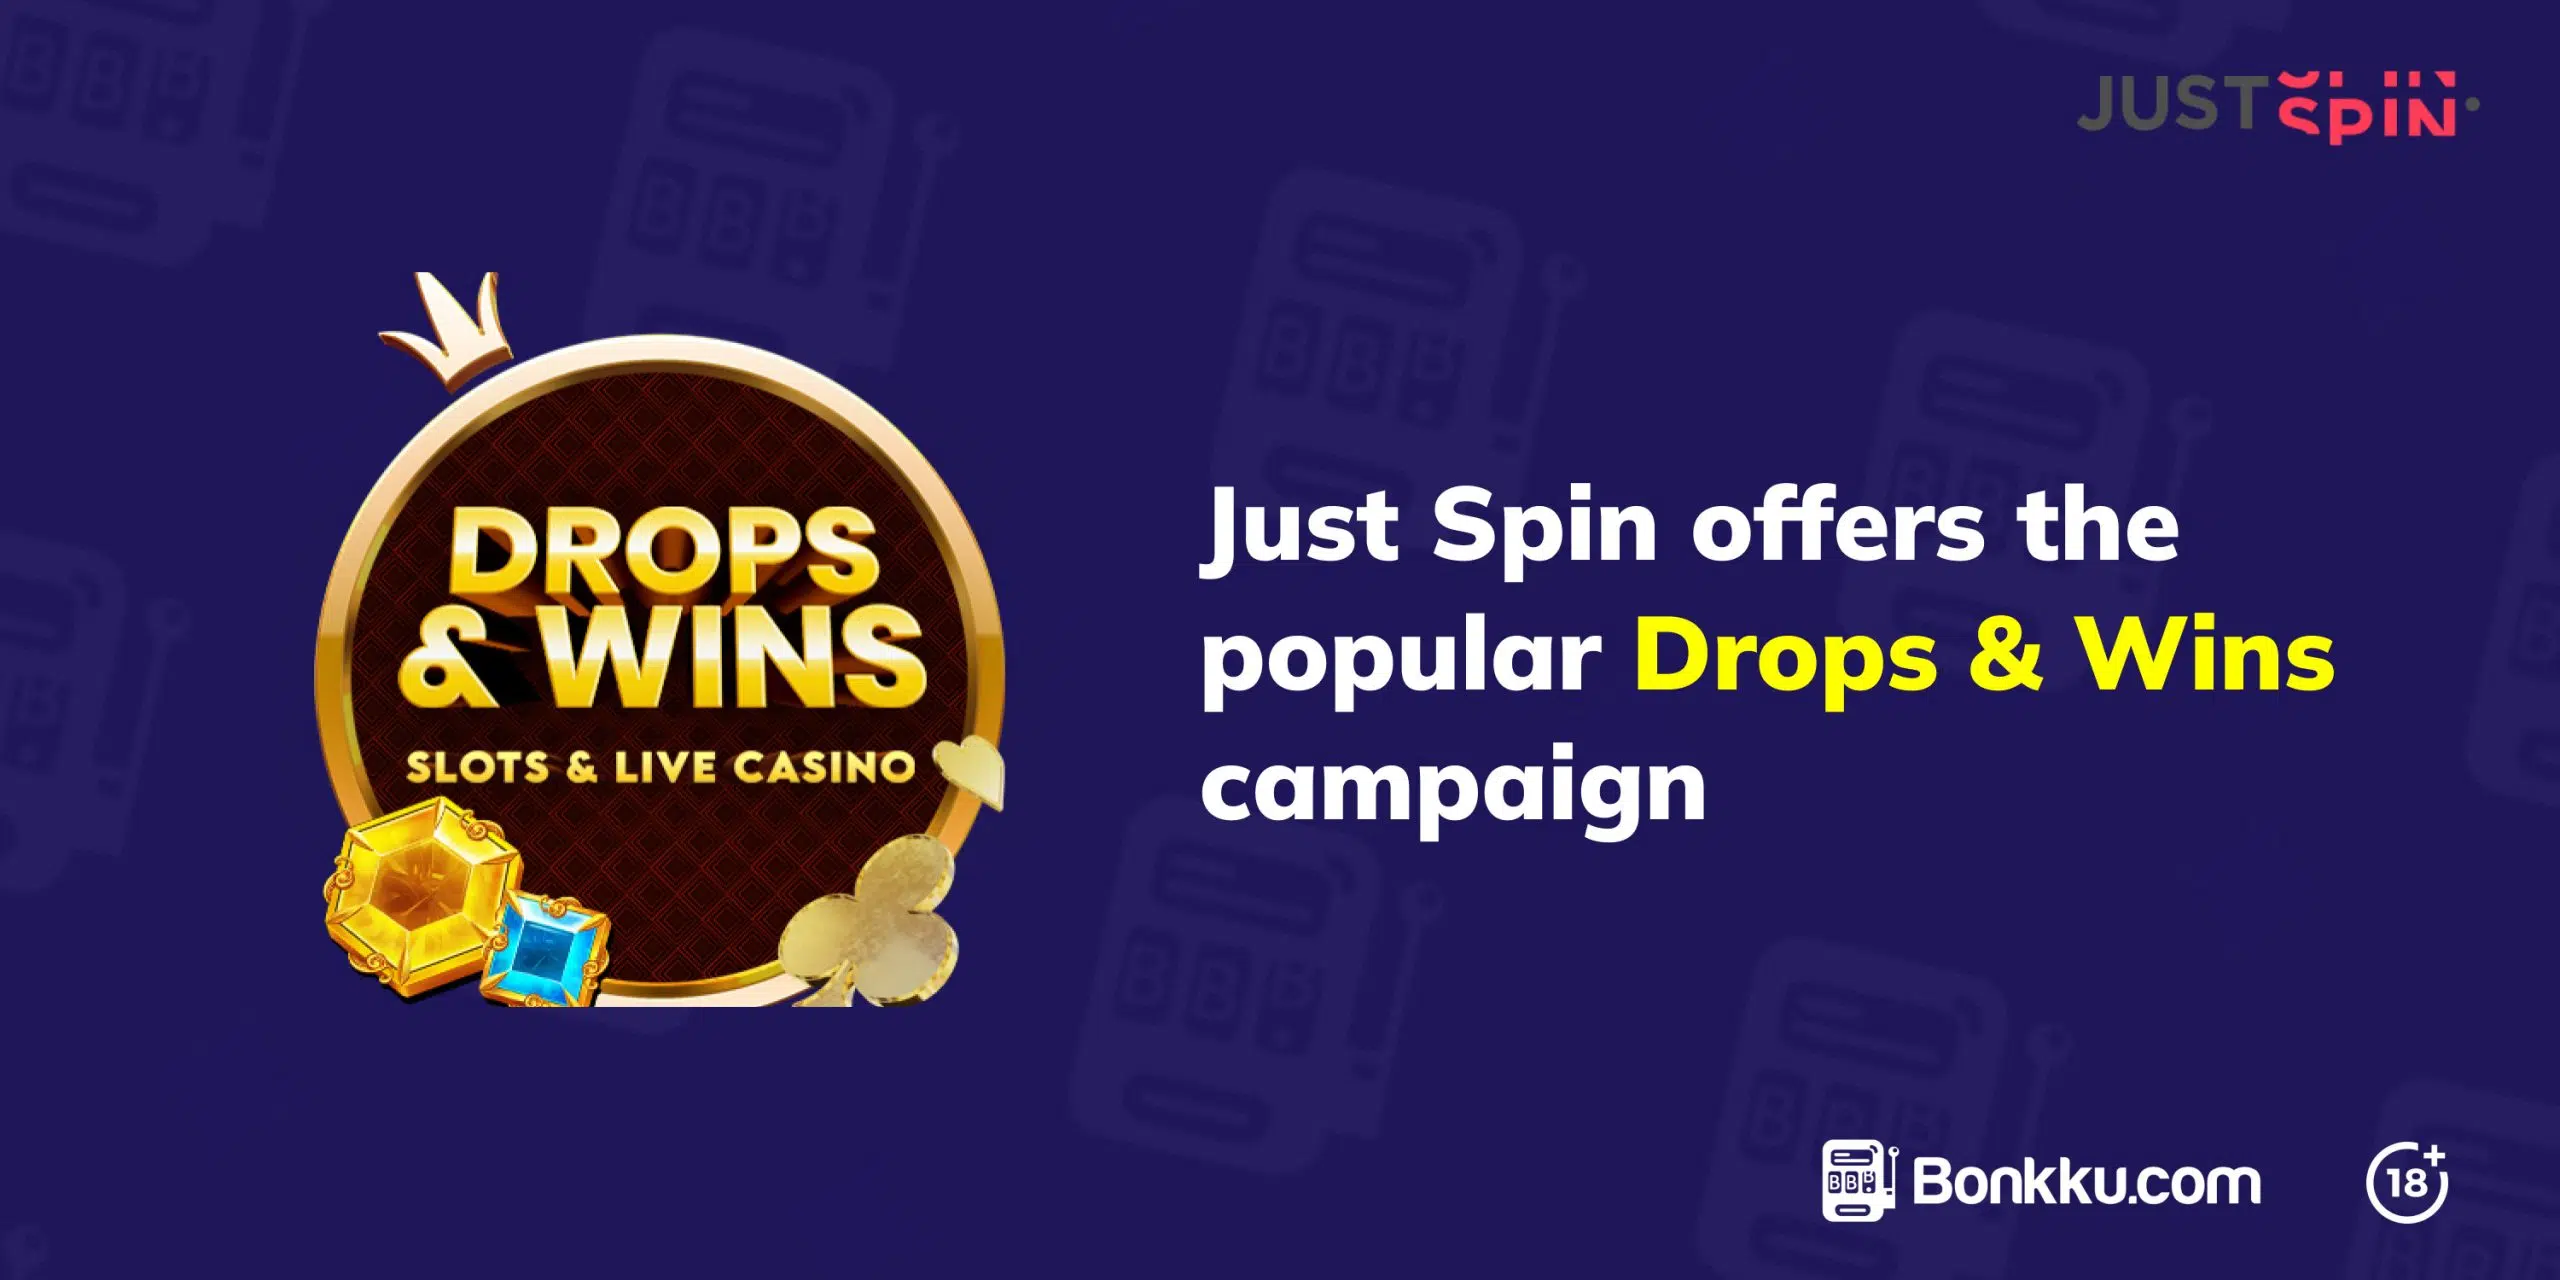 JustSpin Casino drops and wins